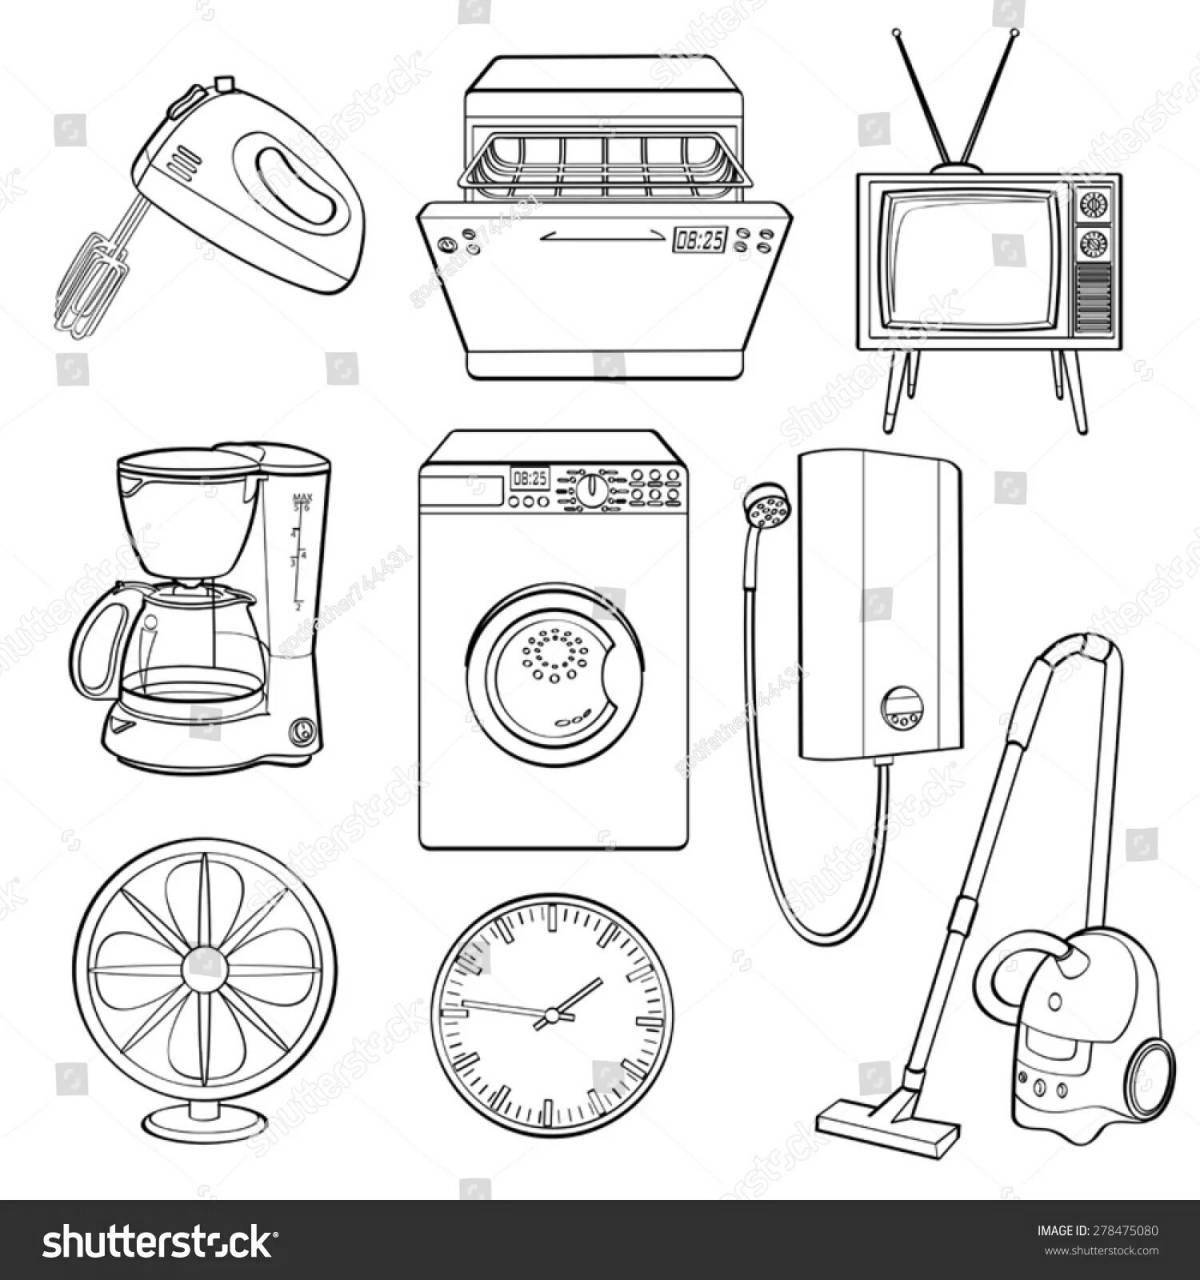 Electrical appliances for children 5 6 years old #17